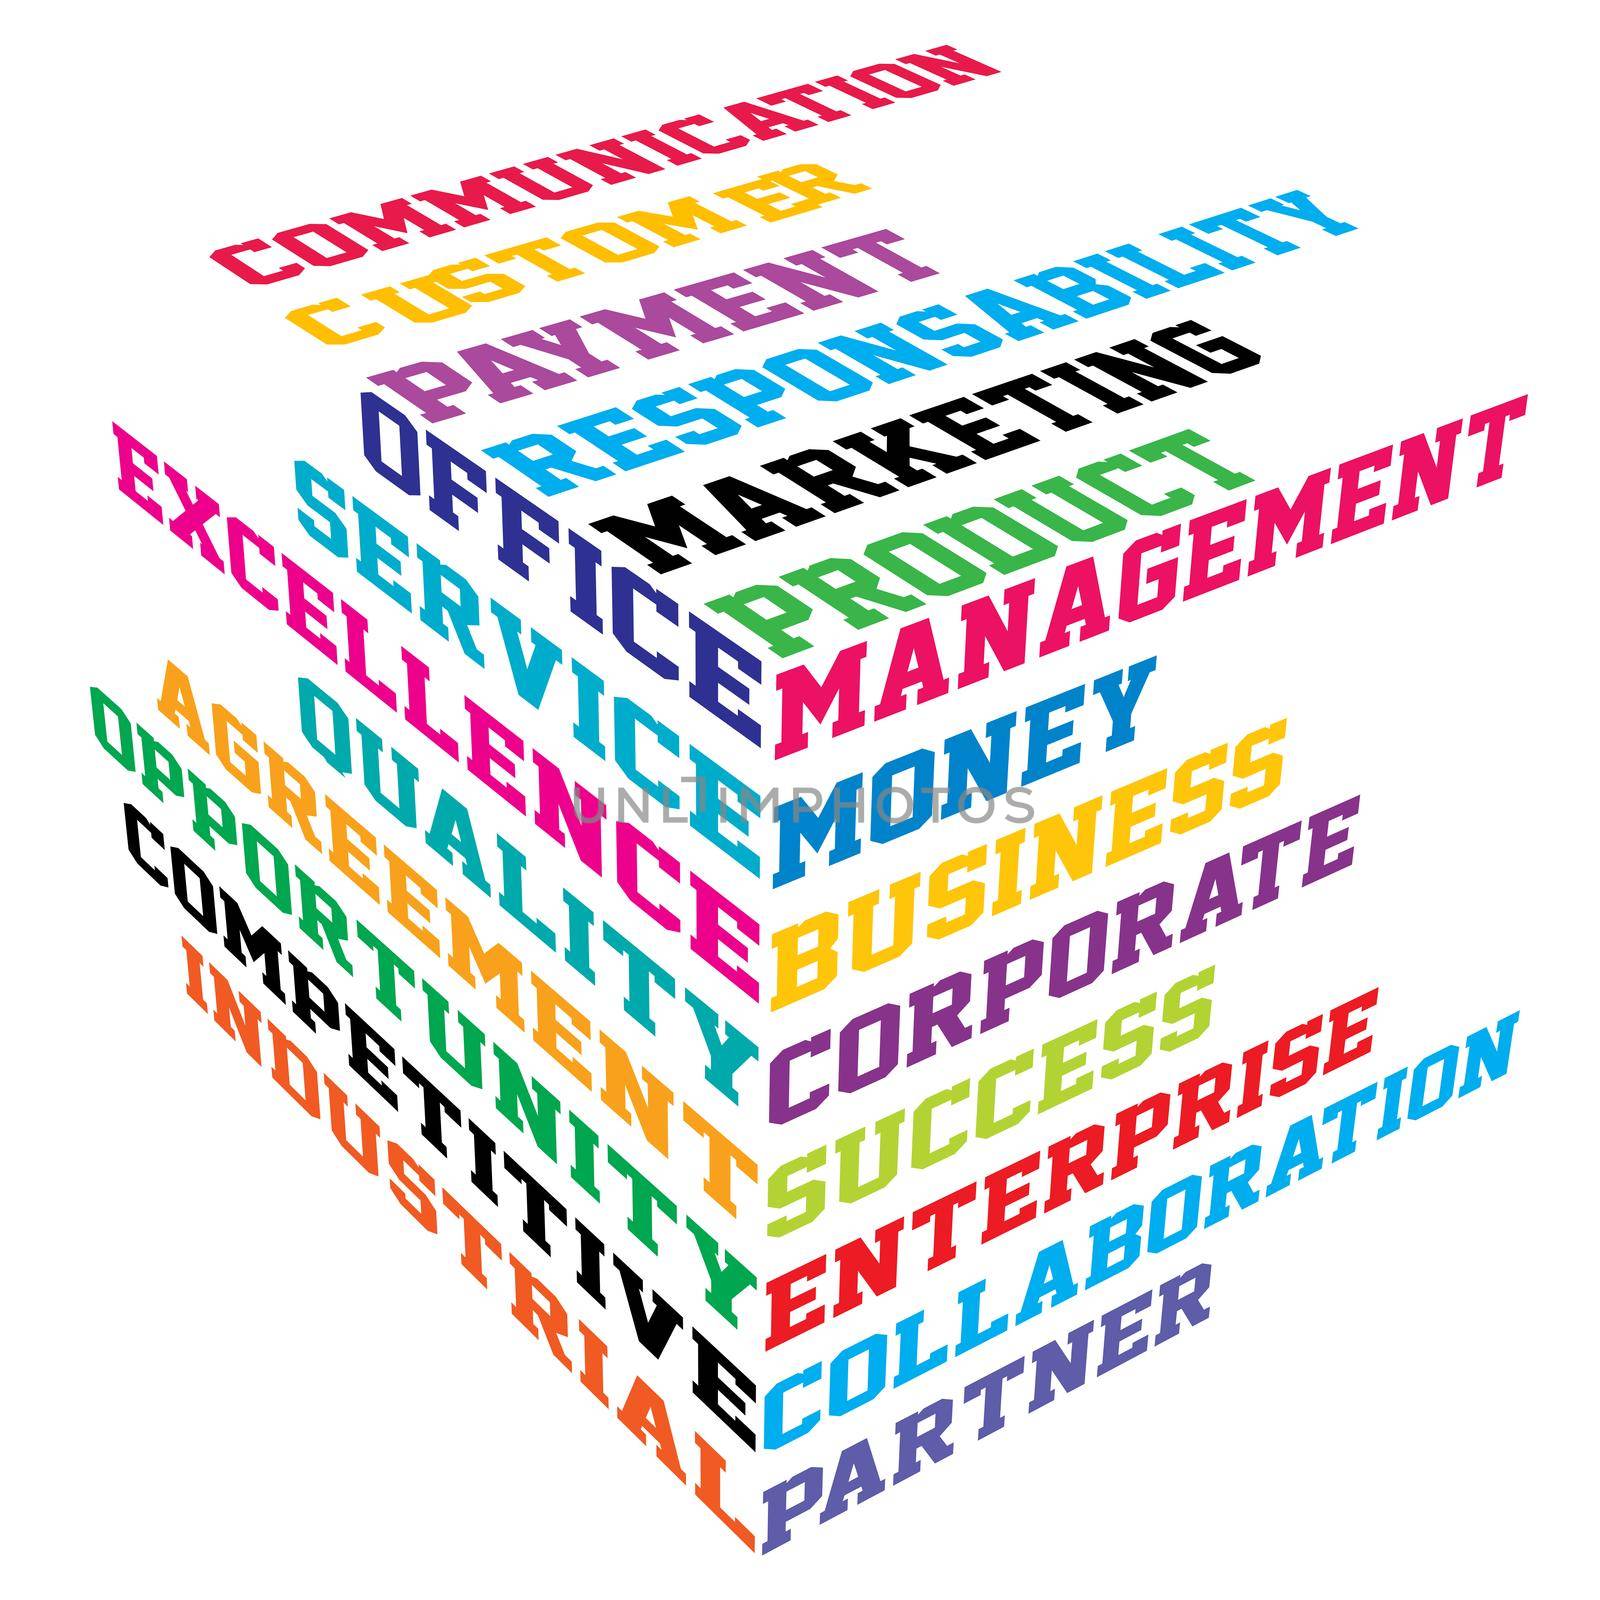 Abstract colored cube with business terms images